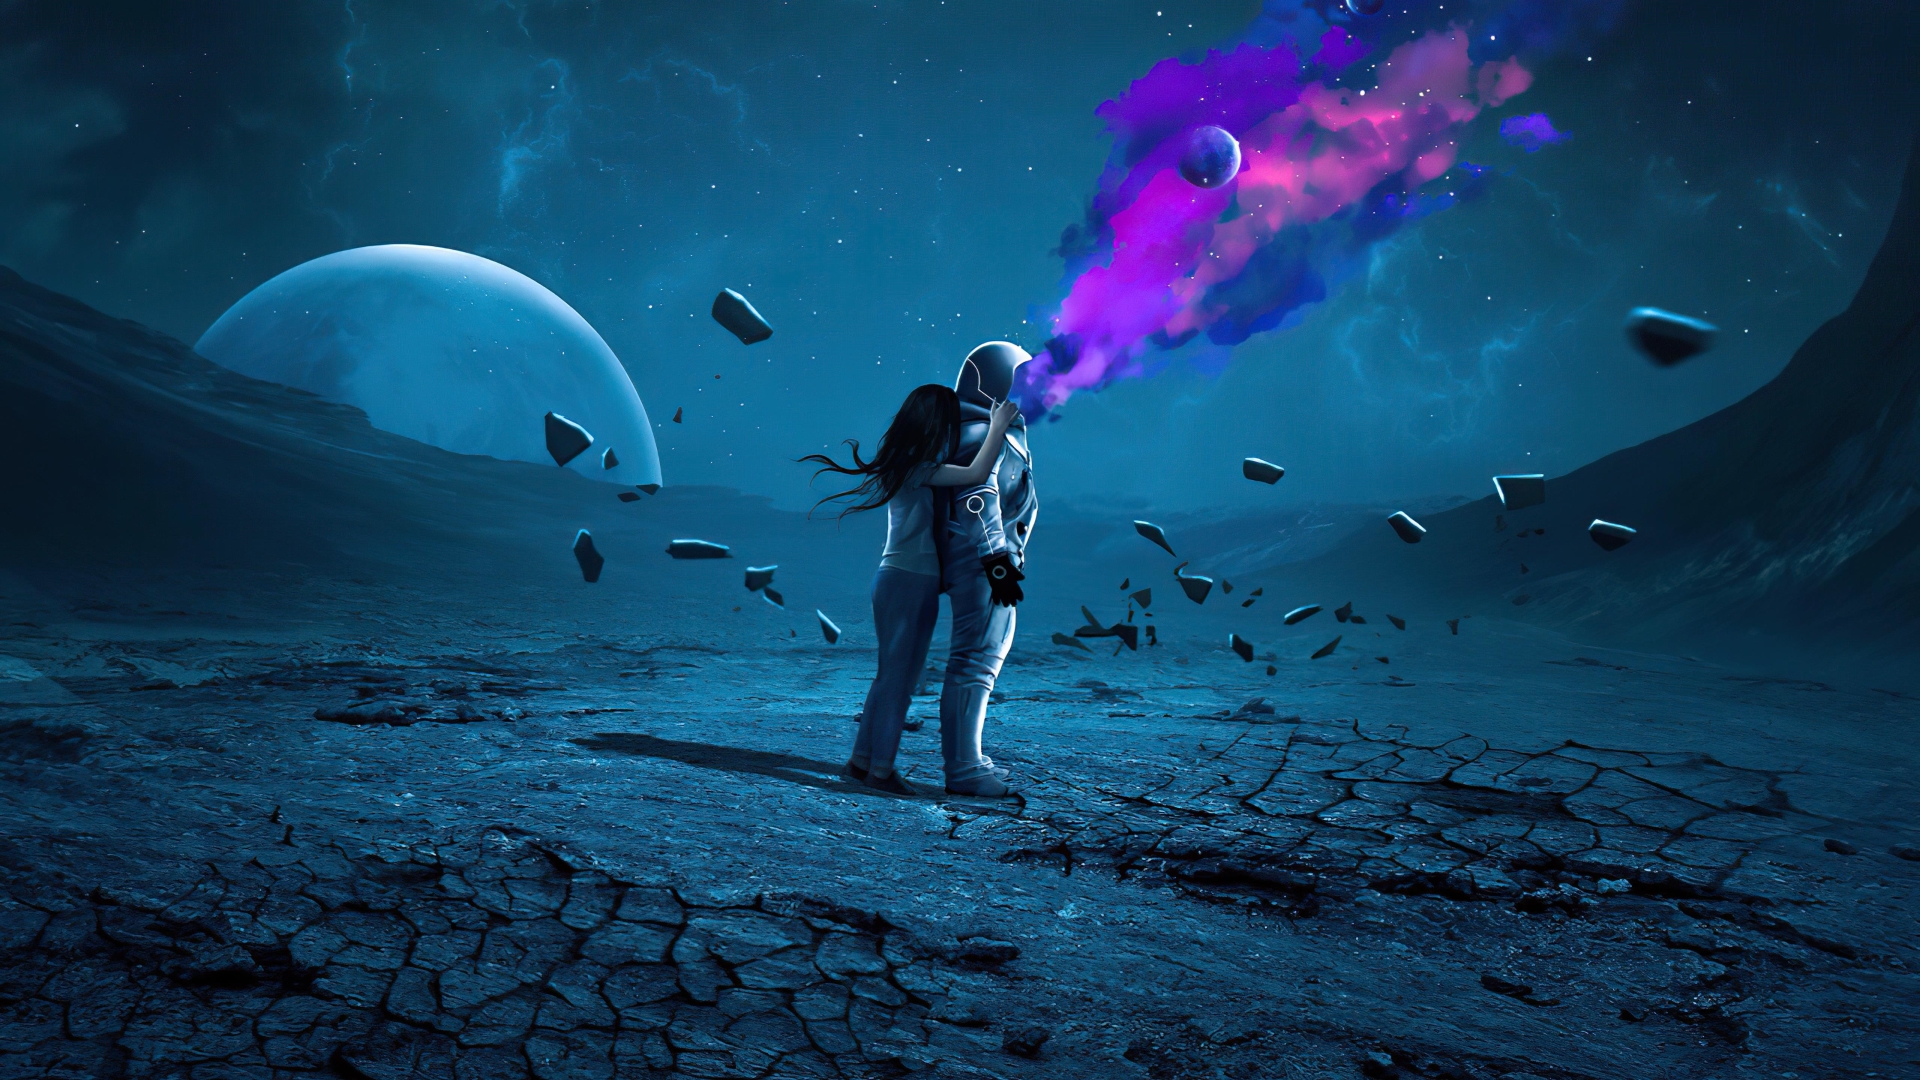 Astronaut In Space Wallpaper Pc - Free Wallpapers HD